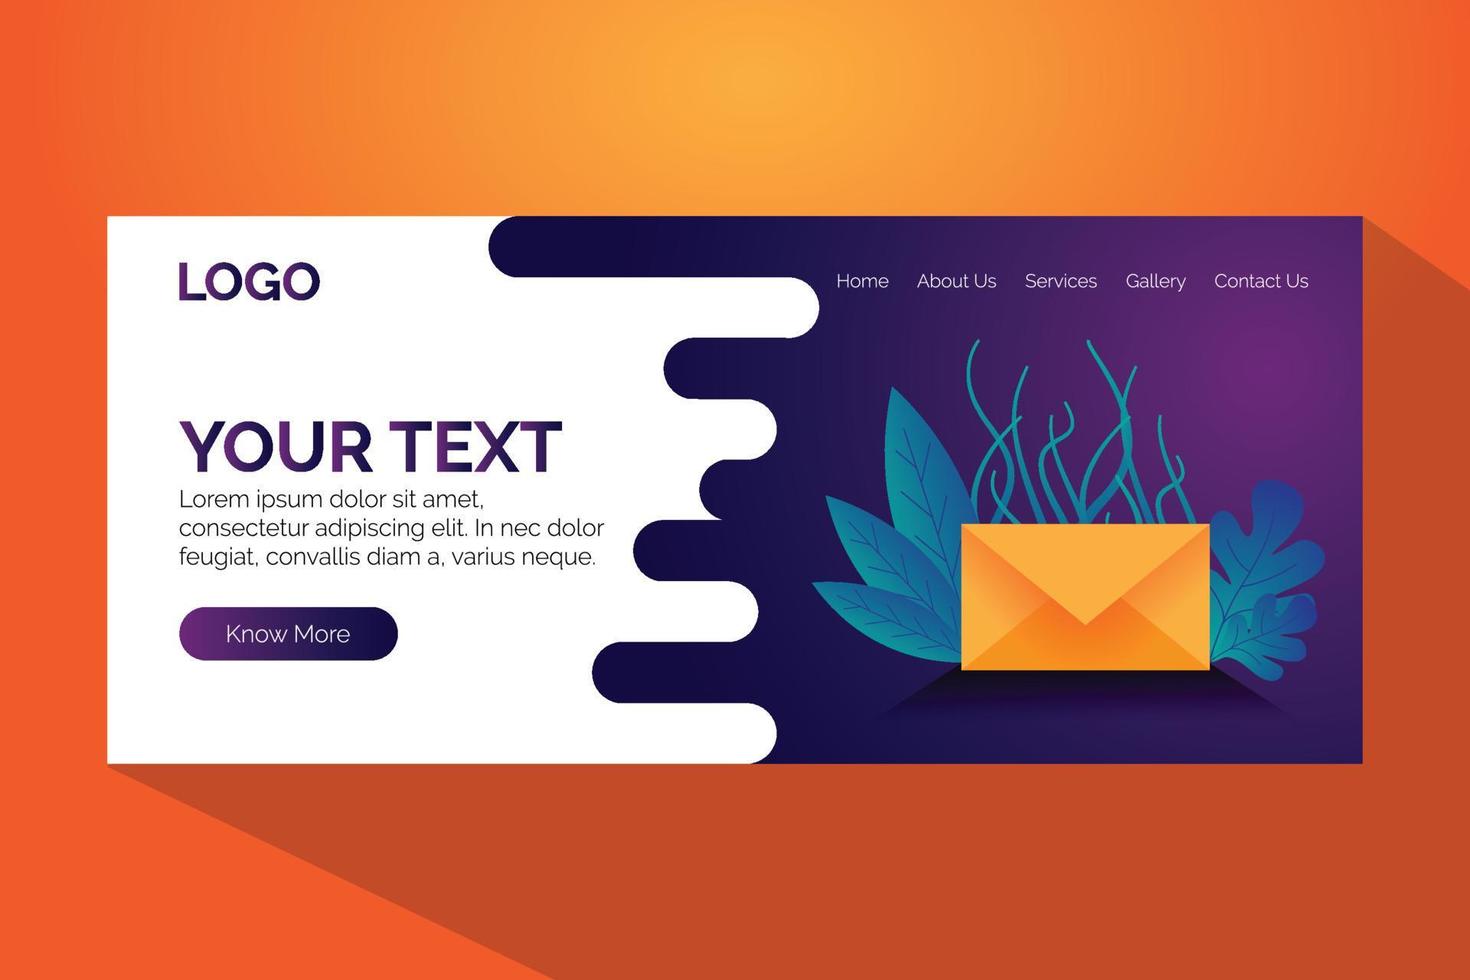 Email marketing concept. email advertising campaign, e-marketing, reaching target audience with emails. send and receive mail. can use for web landing page, banner vector